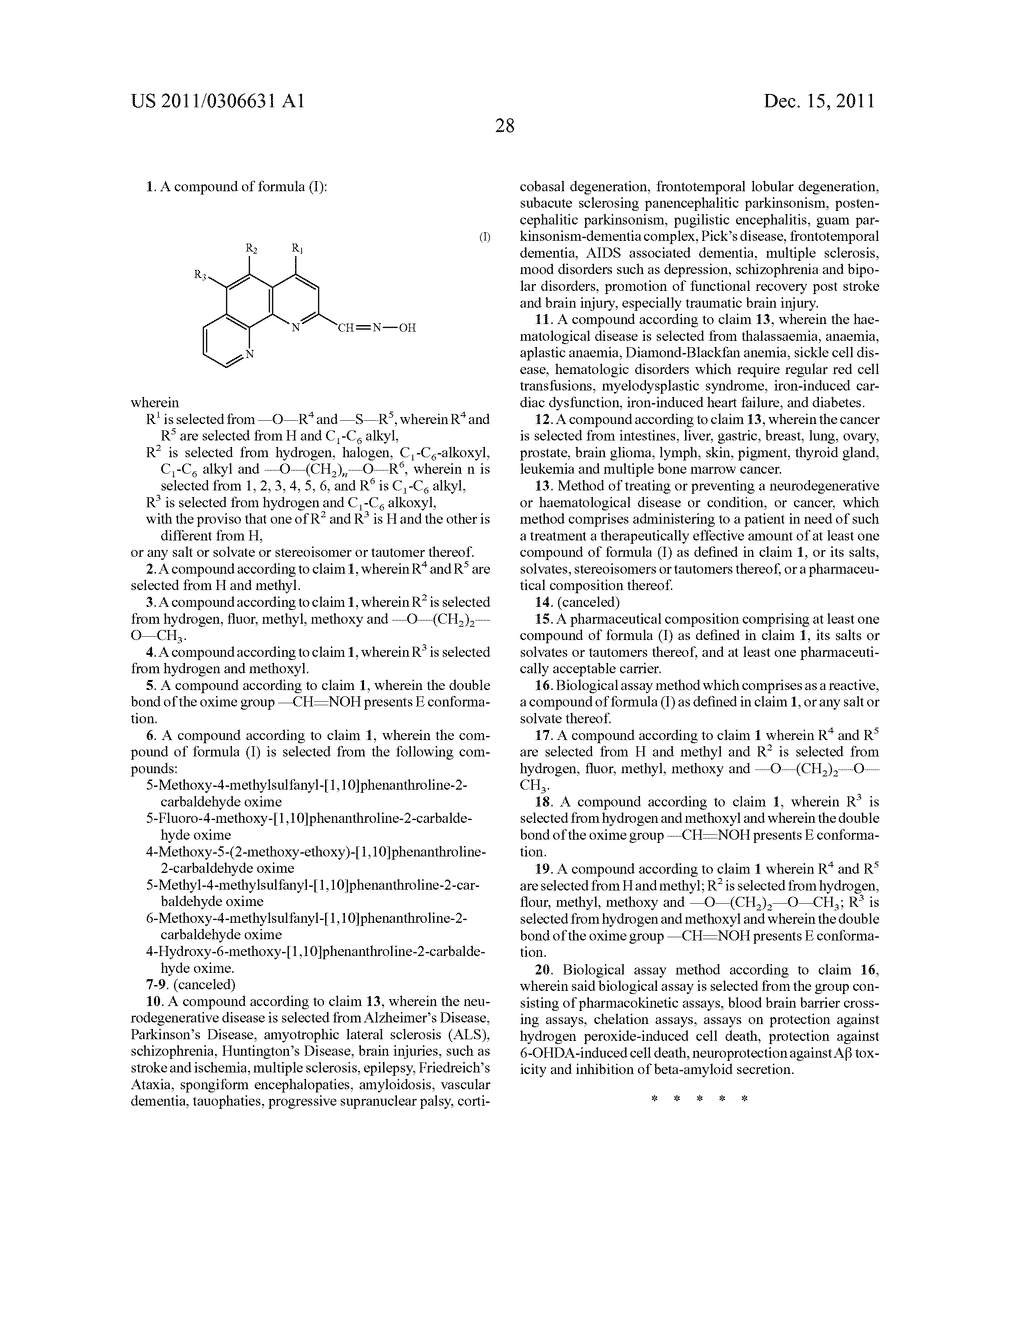 TRIPLE SUBSTITUTED PHENANTHROLINE DERIVATIVES FOR THE TREATMENT OF     NEURODEGENERATIVE OR HAEMATOLOGICAL DISEASES OR CONDITIONS, OR CANCER - diagram, schematic, and image 29